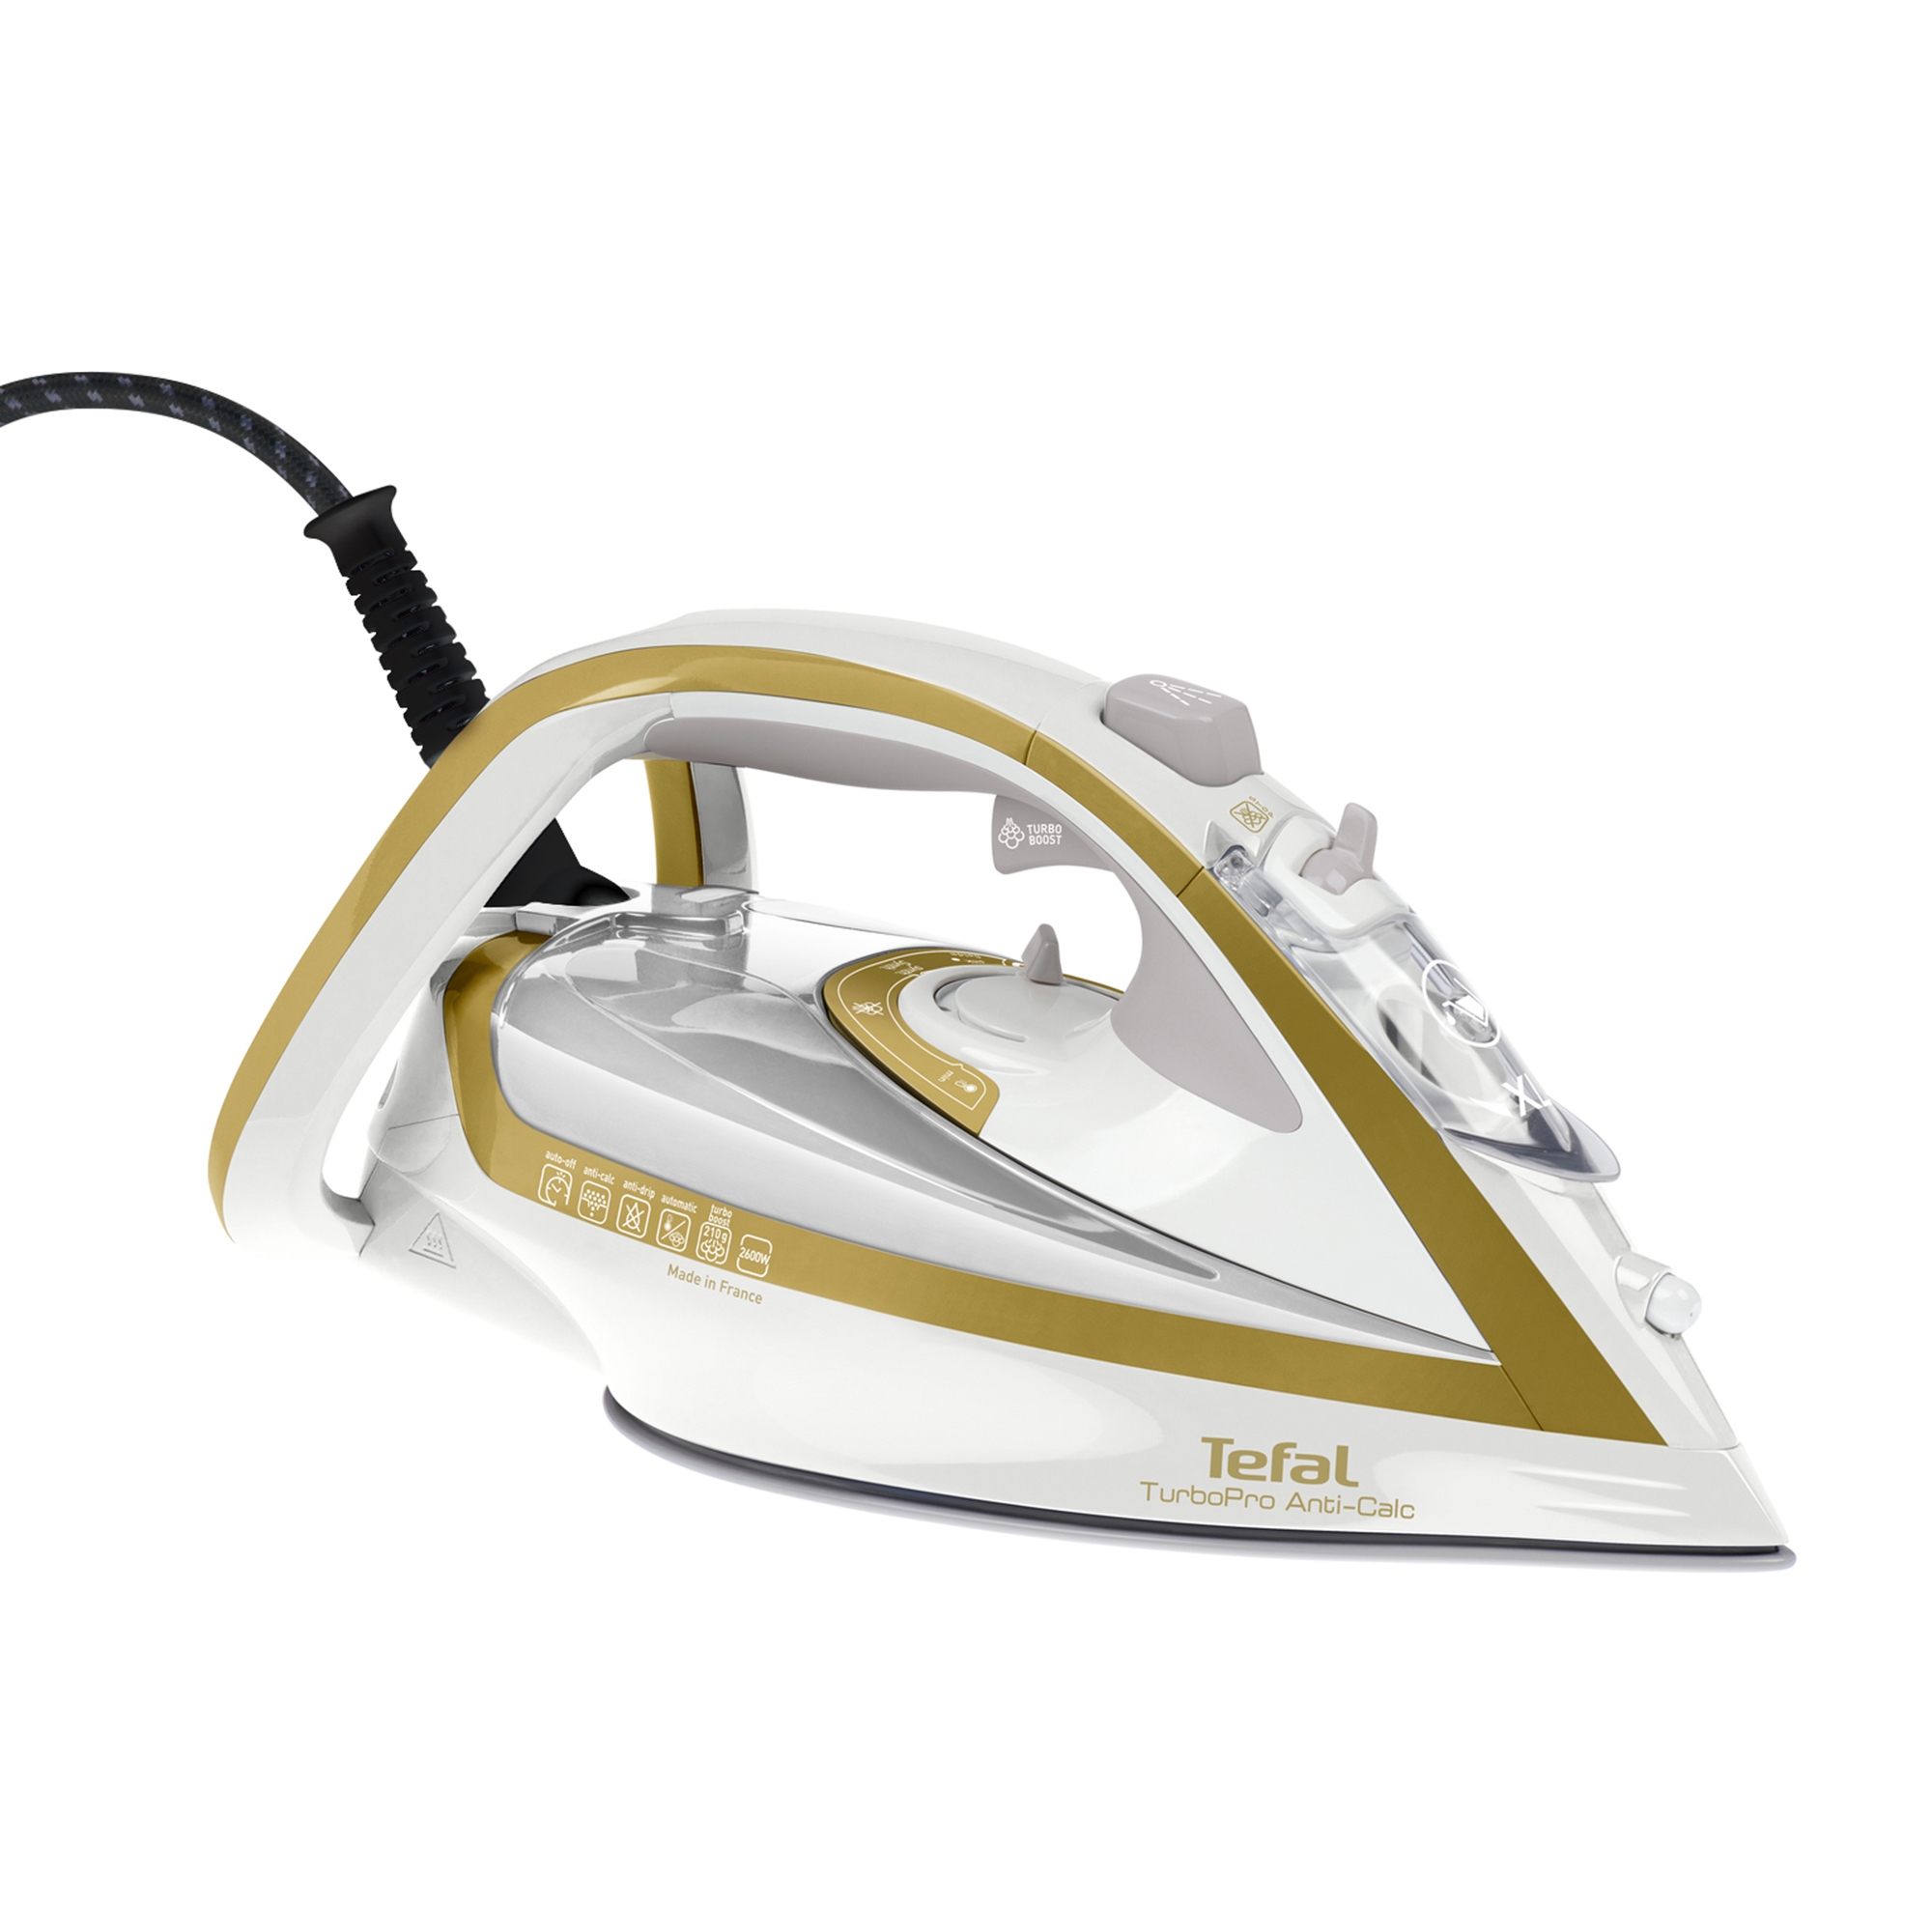 Tefal TurboPro FV5646 Airglide Anti Calc Steam Iron Image 1